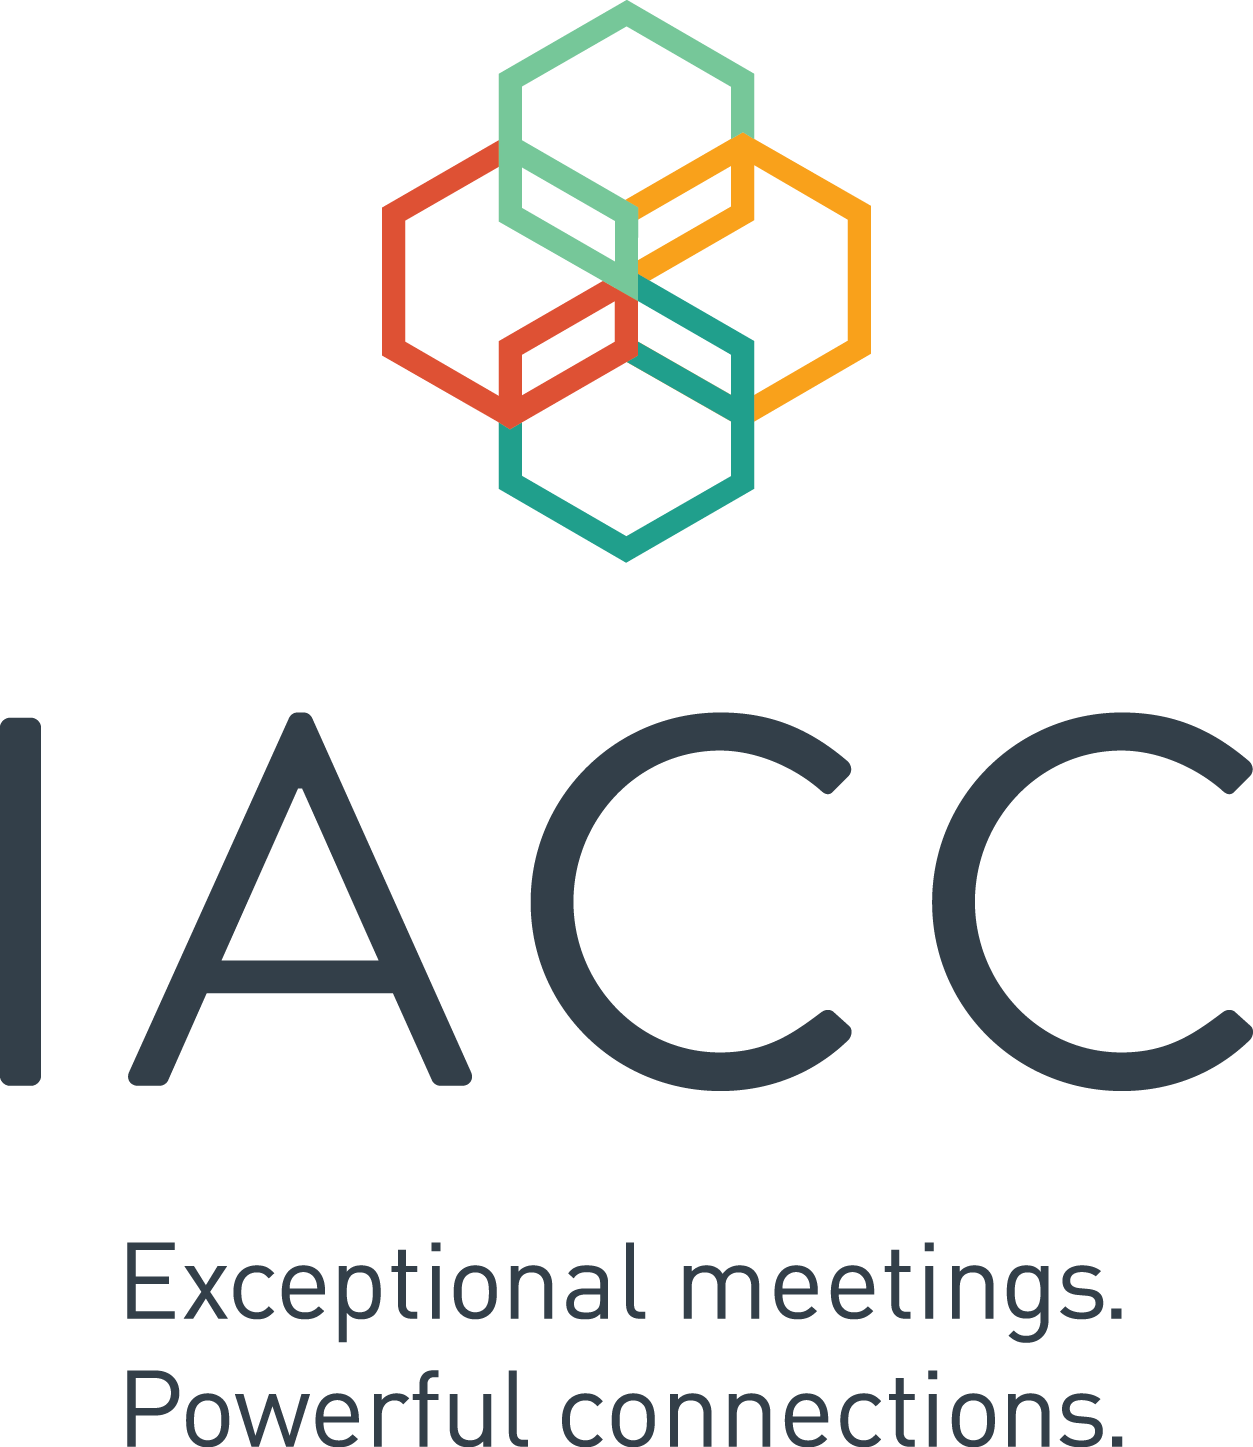 IACC_Logo_Tag_Stacked_RGB.png